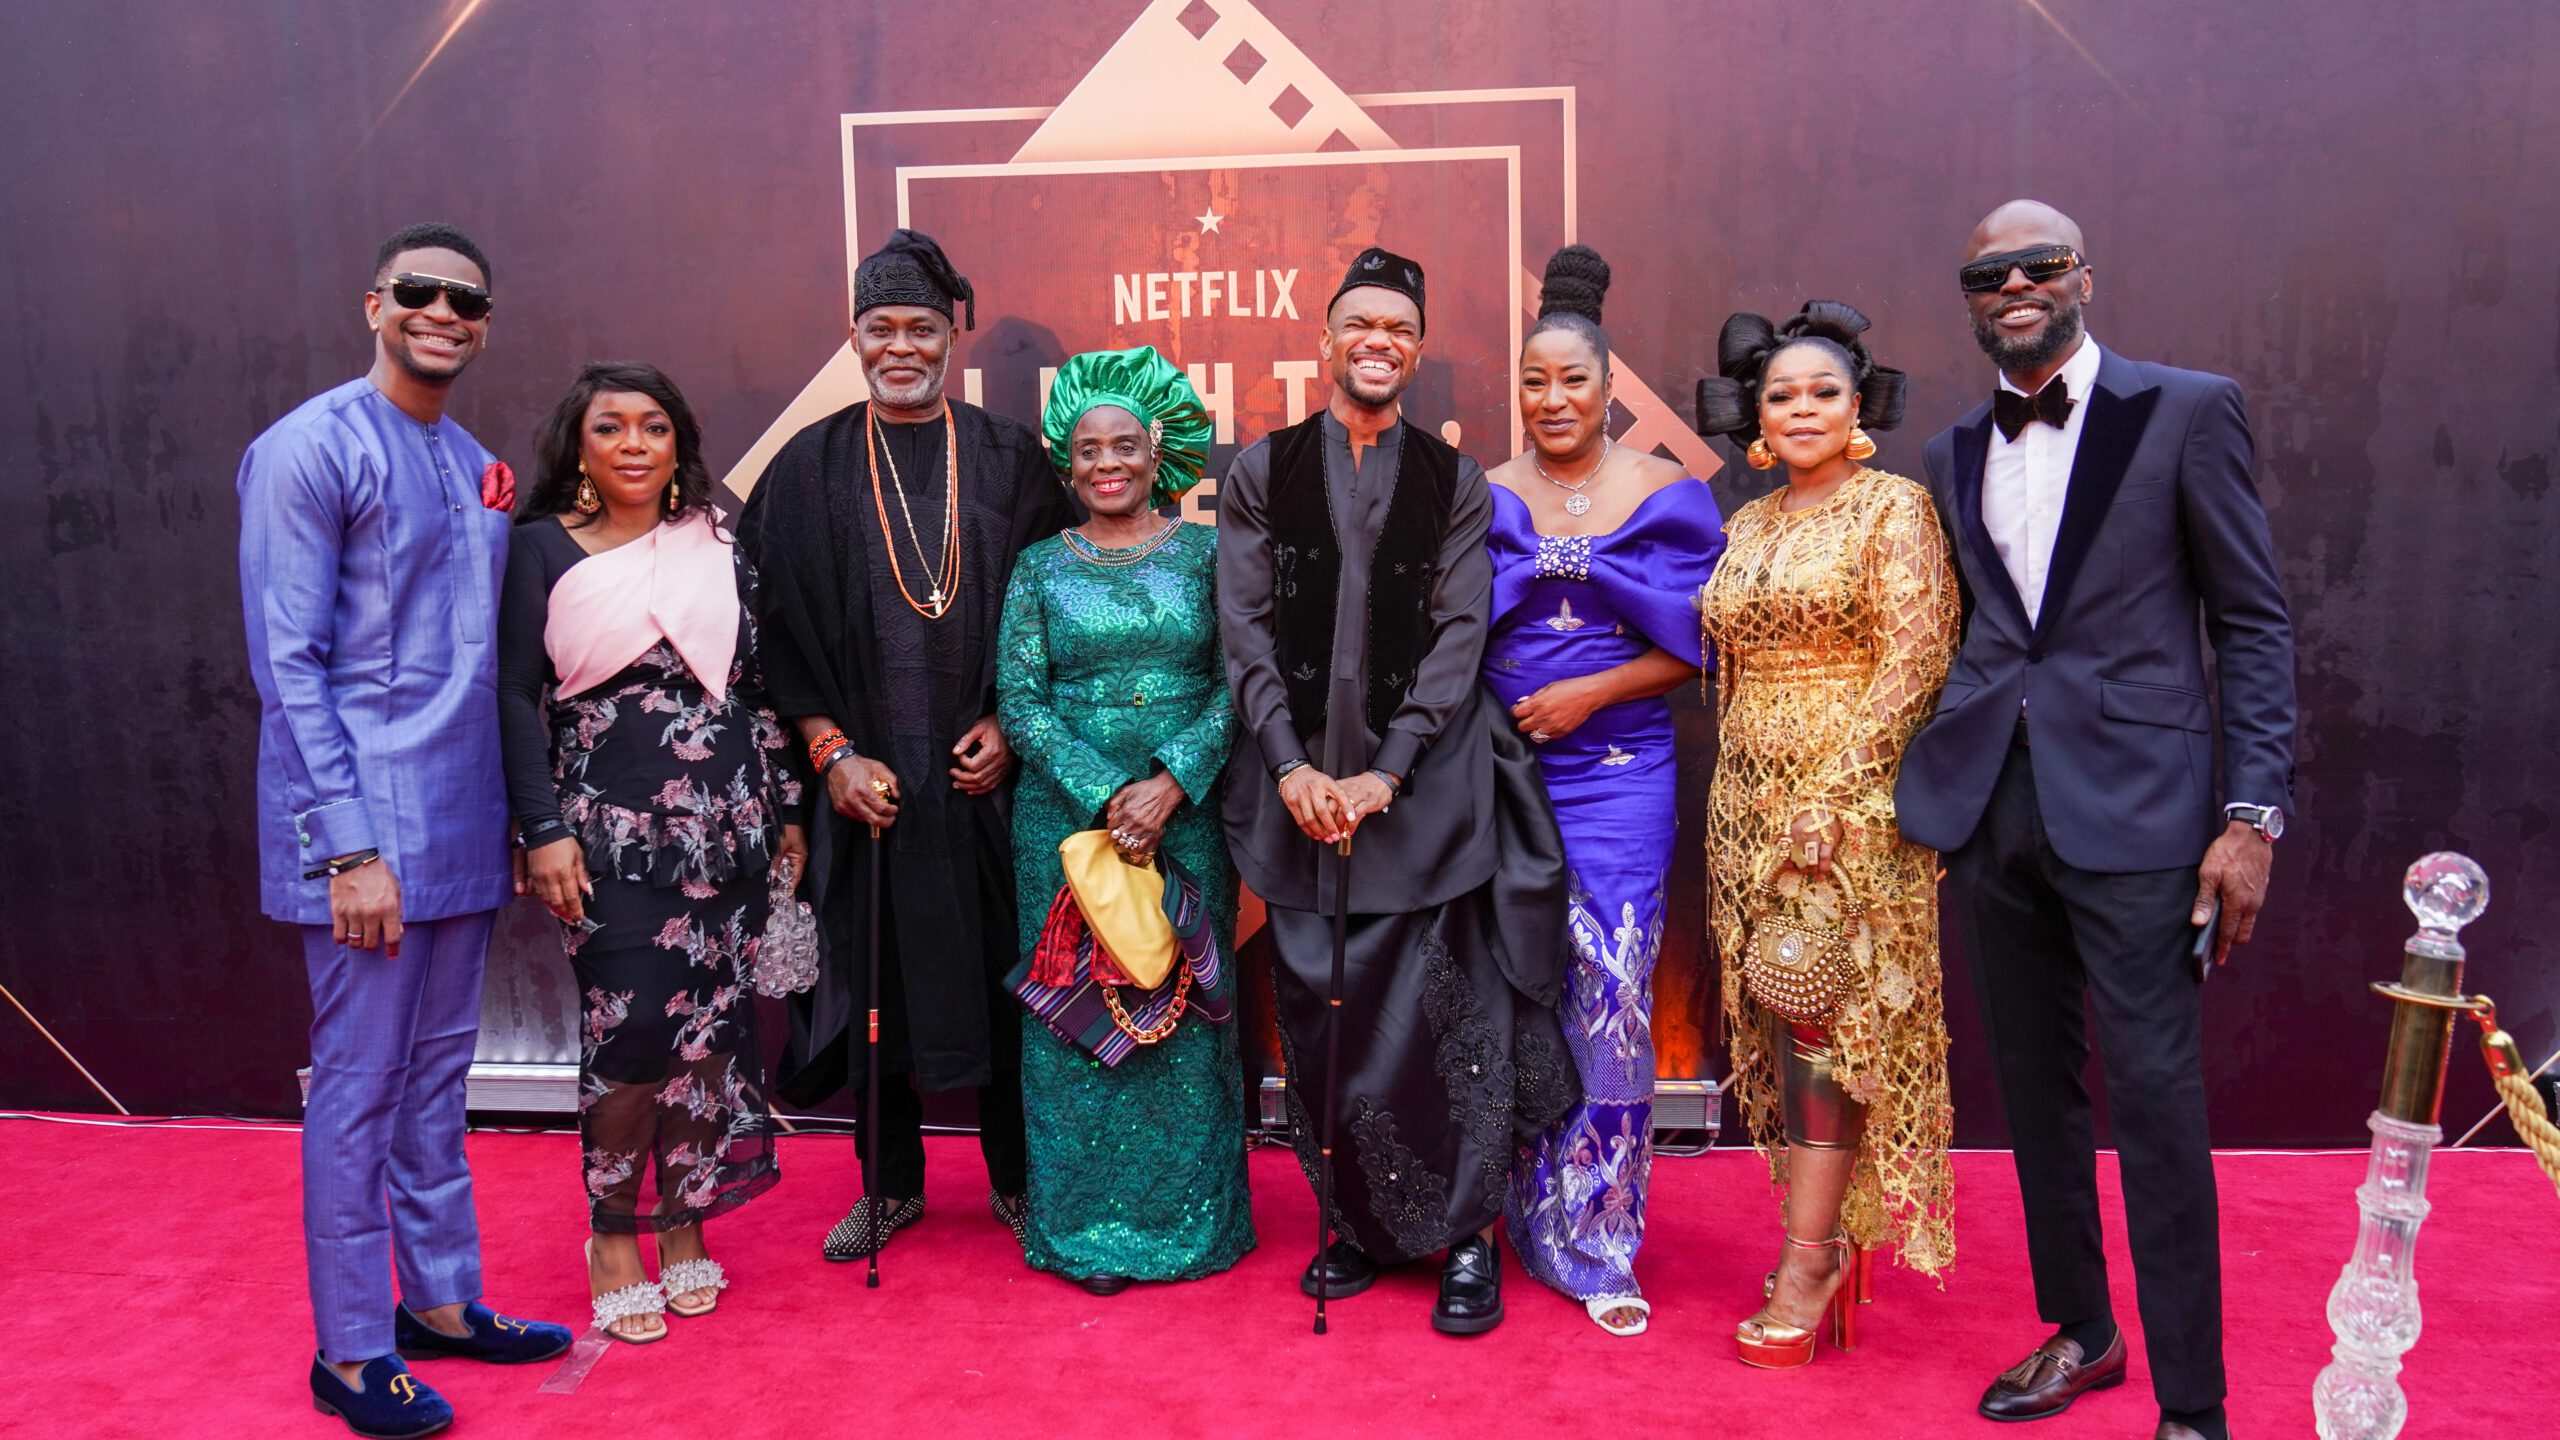 DSC06652 scaled - Red Carpet Photos From Netflix's "Lights, Action, Naija!"